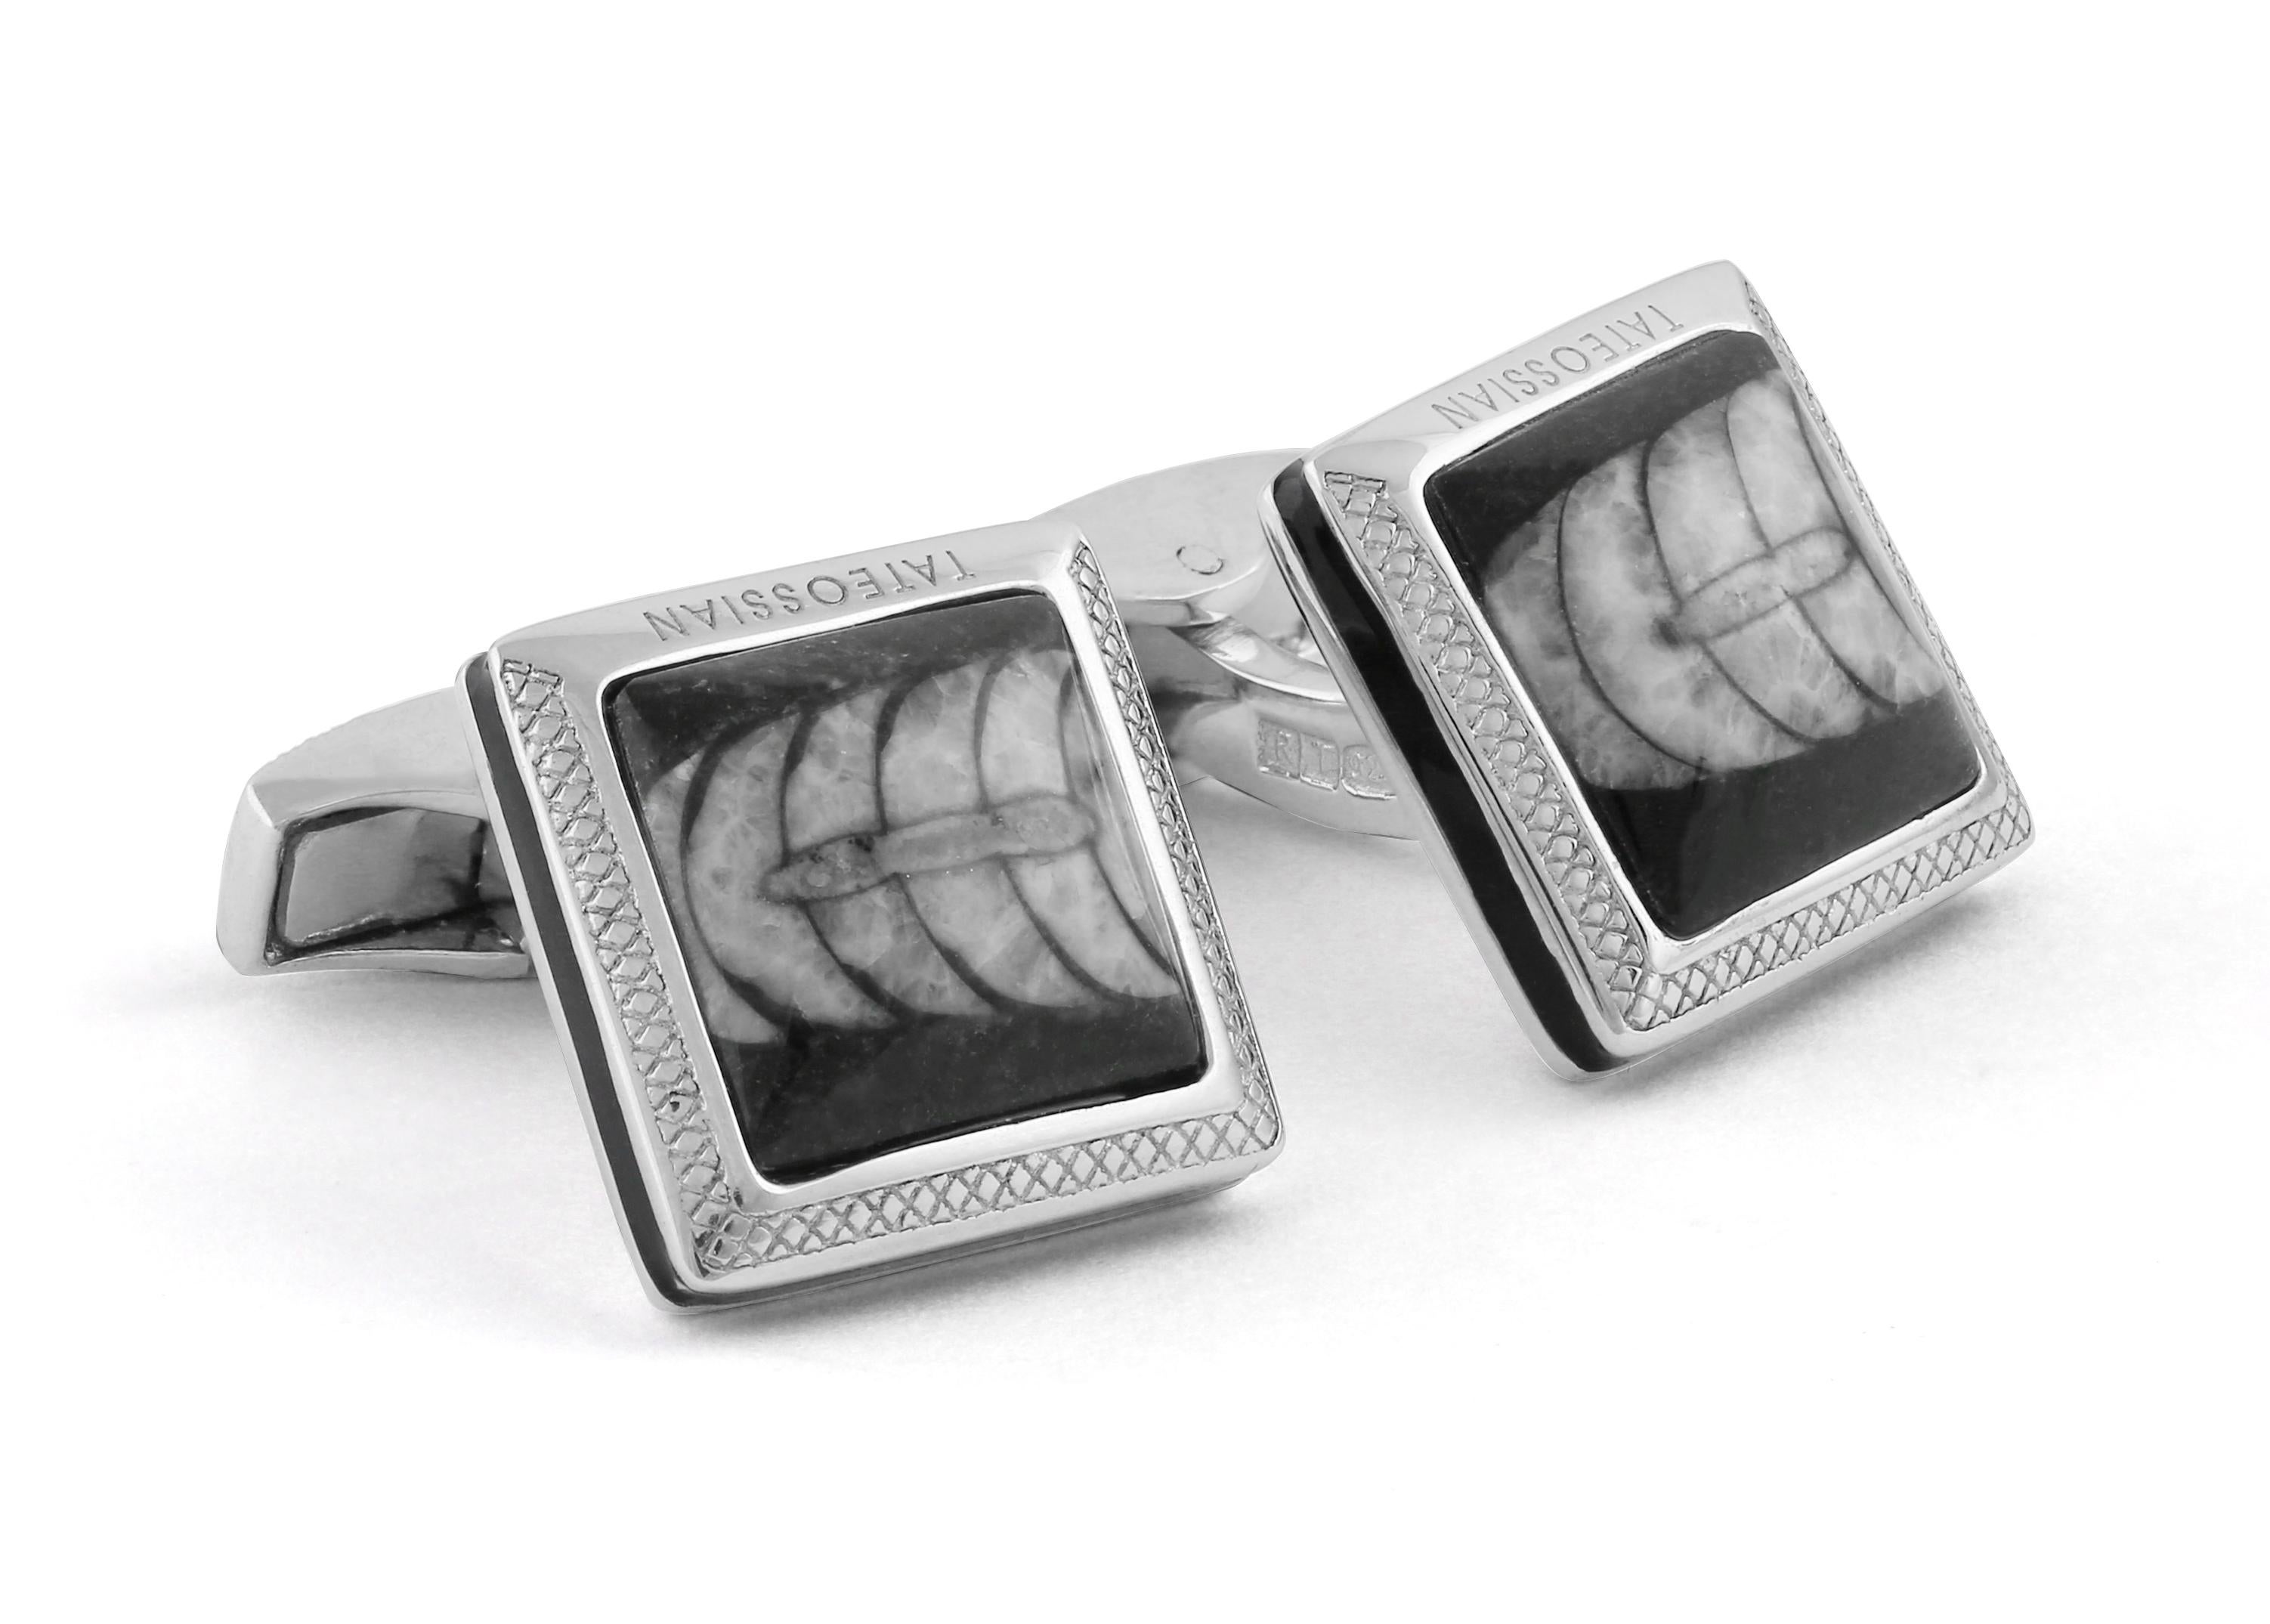 Orthoceras Fossil Silver Cufflinks 'Limited Edition, 40 Pairs' In New Condition For Sale In Fulham business exchange, London